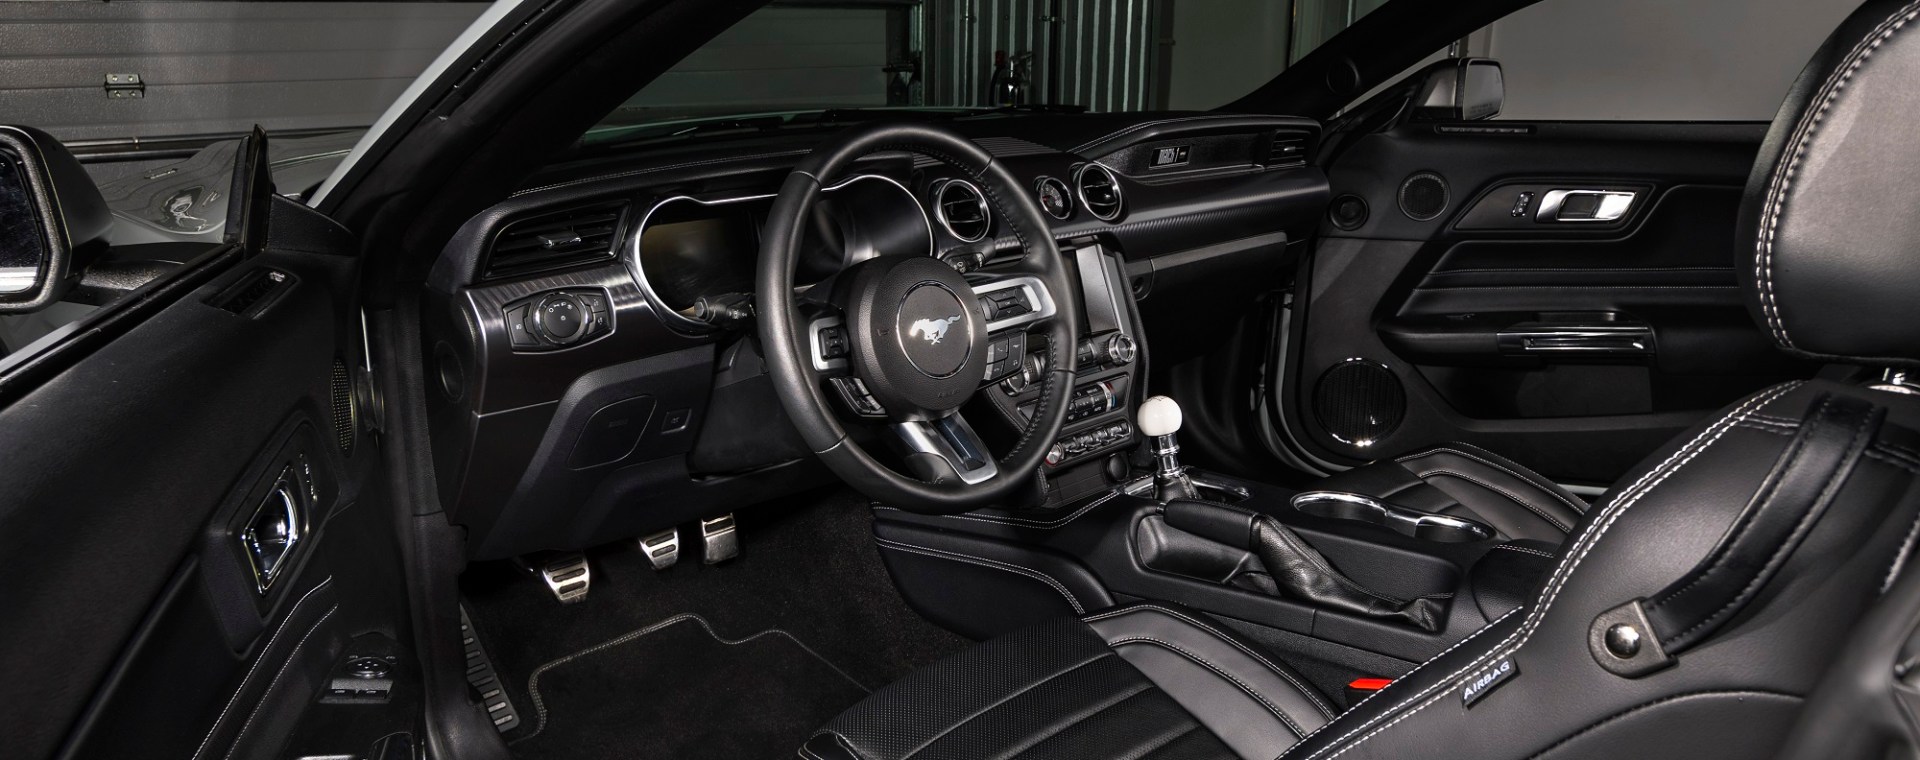 The 2024 Ford Mustang will have a manual, just like this S550 Ford Mustang Mach 1.